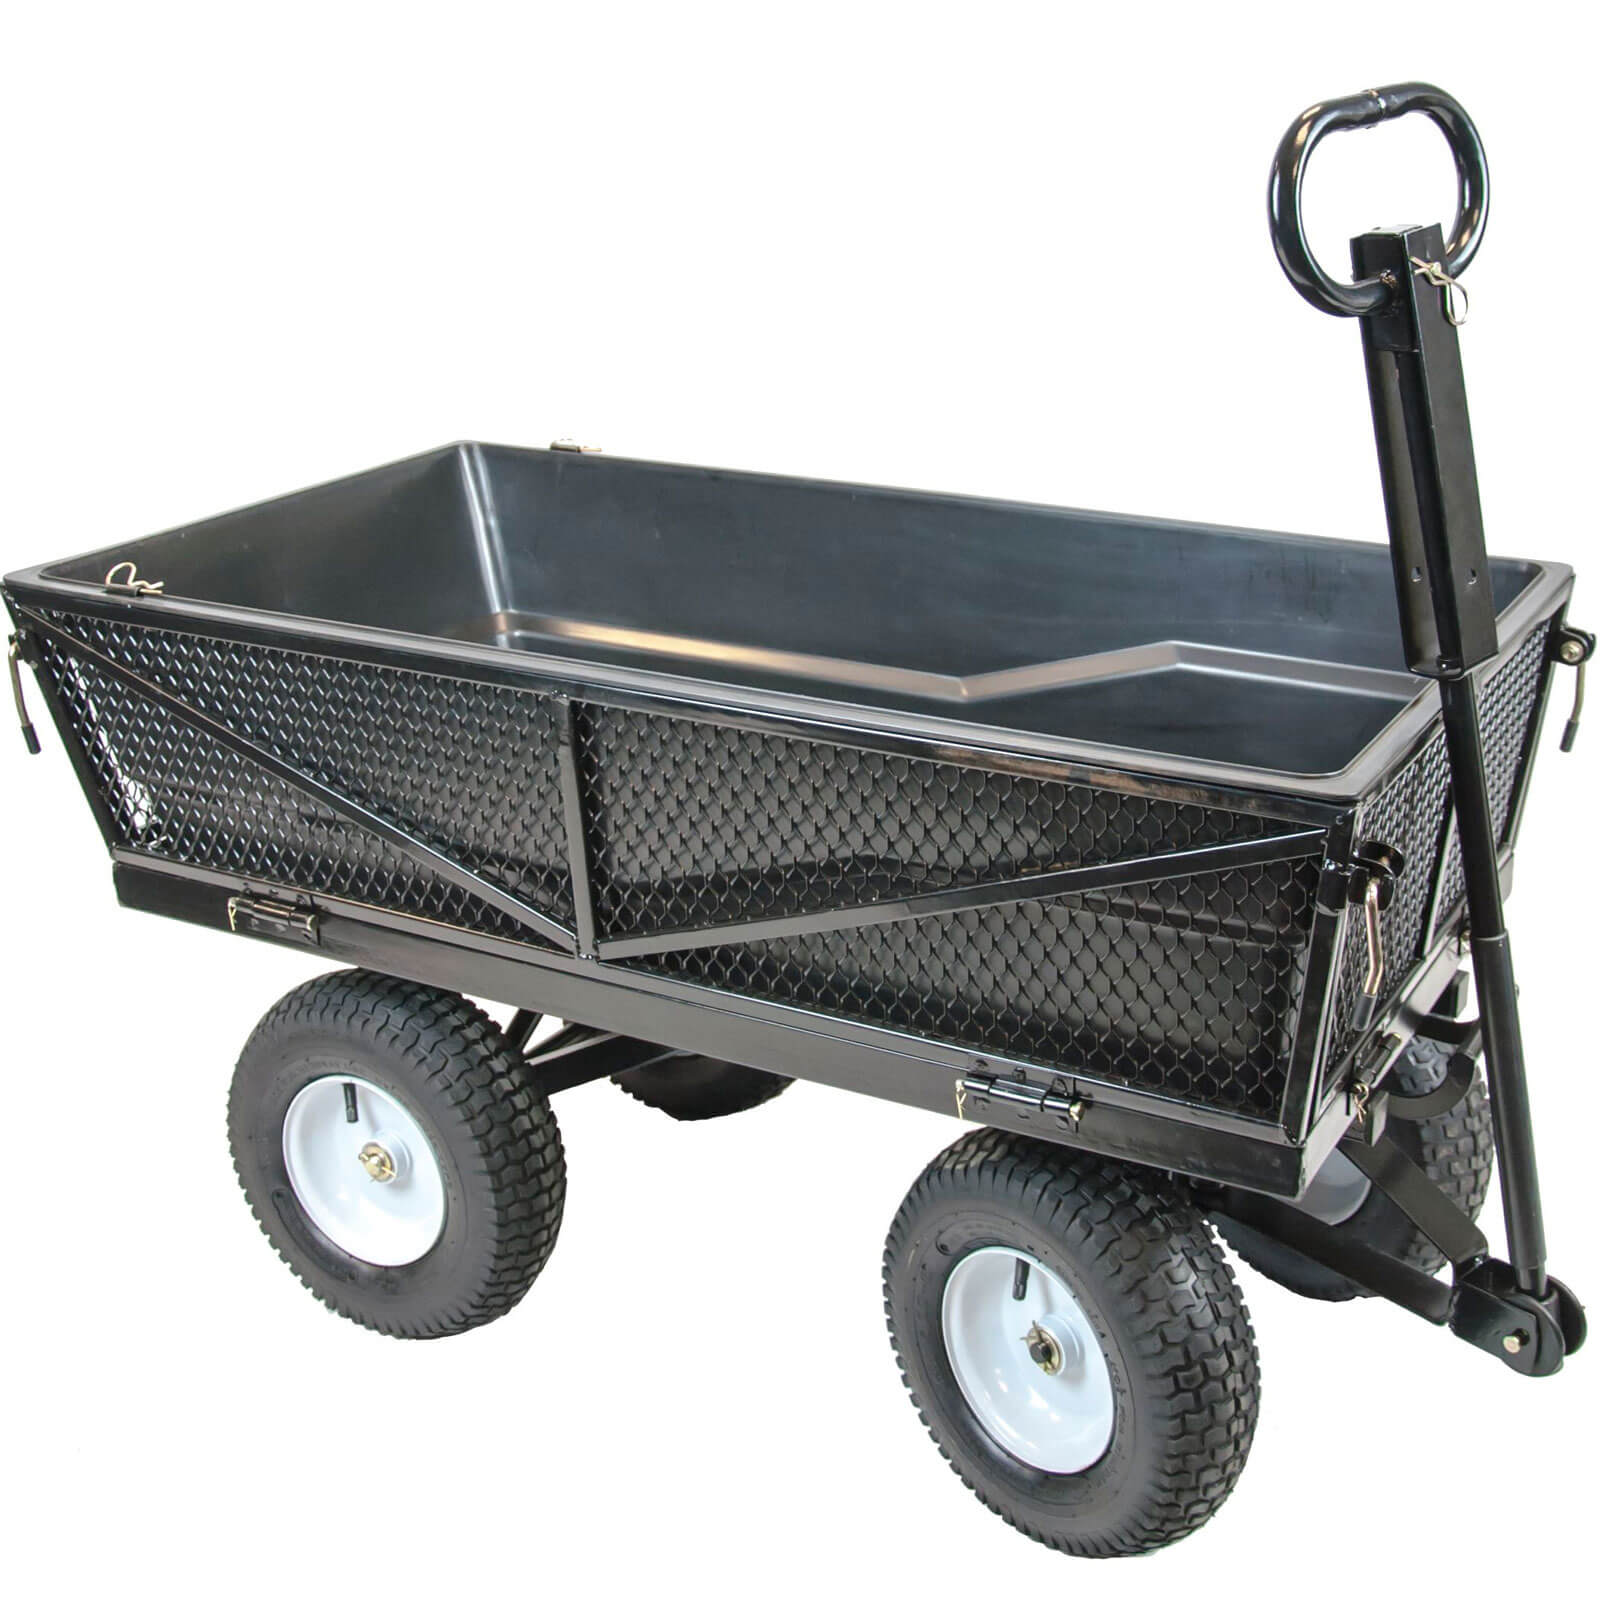 Handy THMPC Multi Purpose Tipping Towable Garden Trolley 300kg